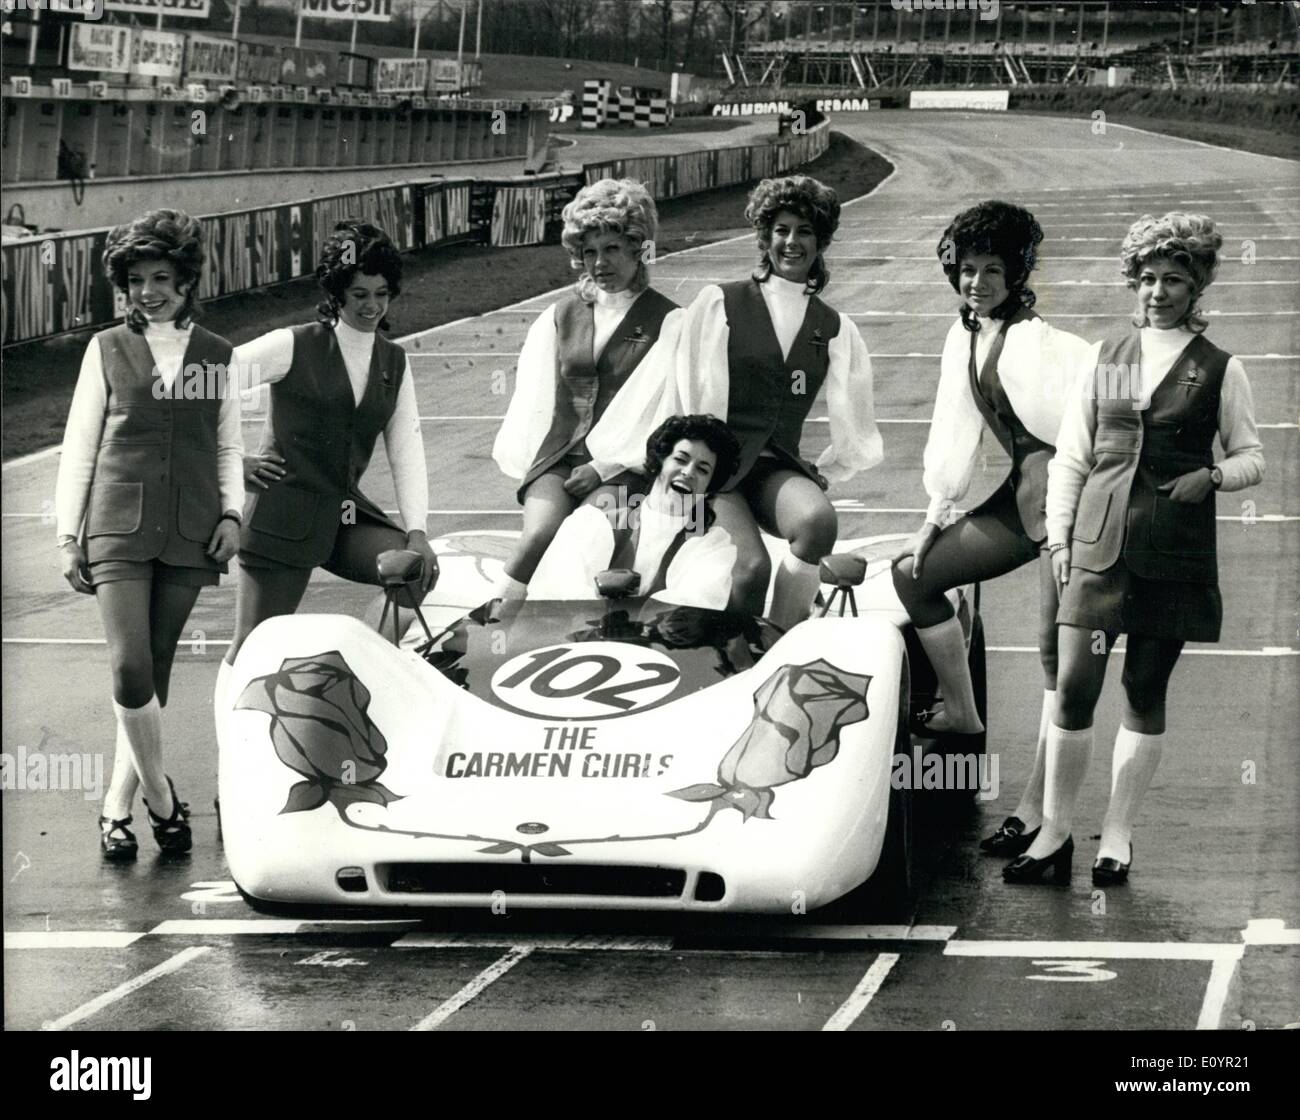 Mar. 03, 1971 - The 'Carmen Curis' The First All Girls Motor Racing Team: The house of Carmen, leaders is Beauty and Personal Care products are sponsoring a two-car racing team from Motor Racing Stables. Carmen, founded and directed by attractive, Petite Jackie Pressman are taking the woman's touch to a man's sport with a team of seven girls. Number one driver is blonde Gabriele Kosig, undoubtedly the best woman drive in Britain - She has 9 lap records and over 30 wins in her last two seasons Stock Photo